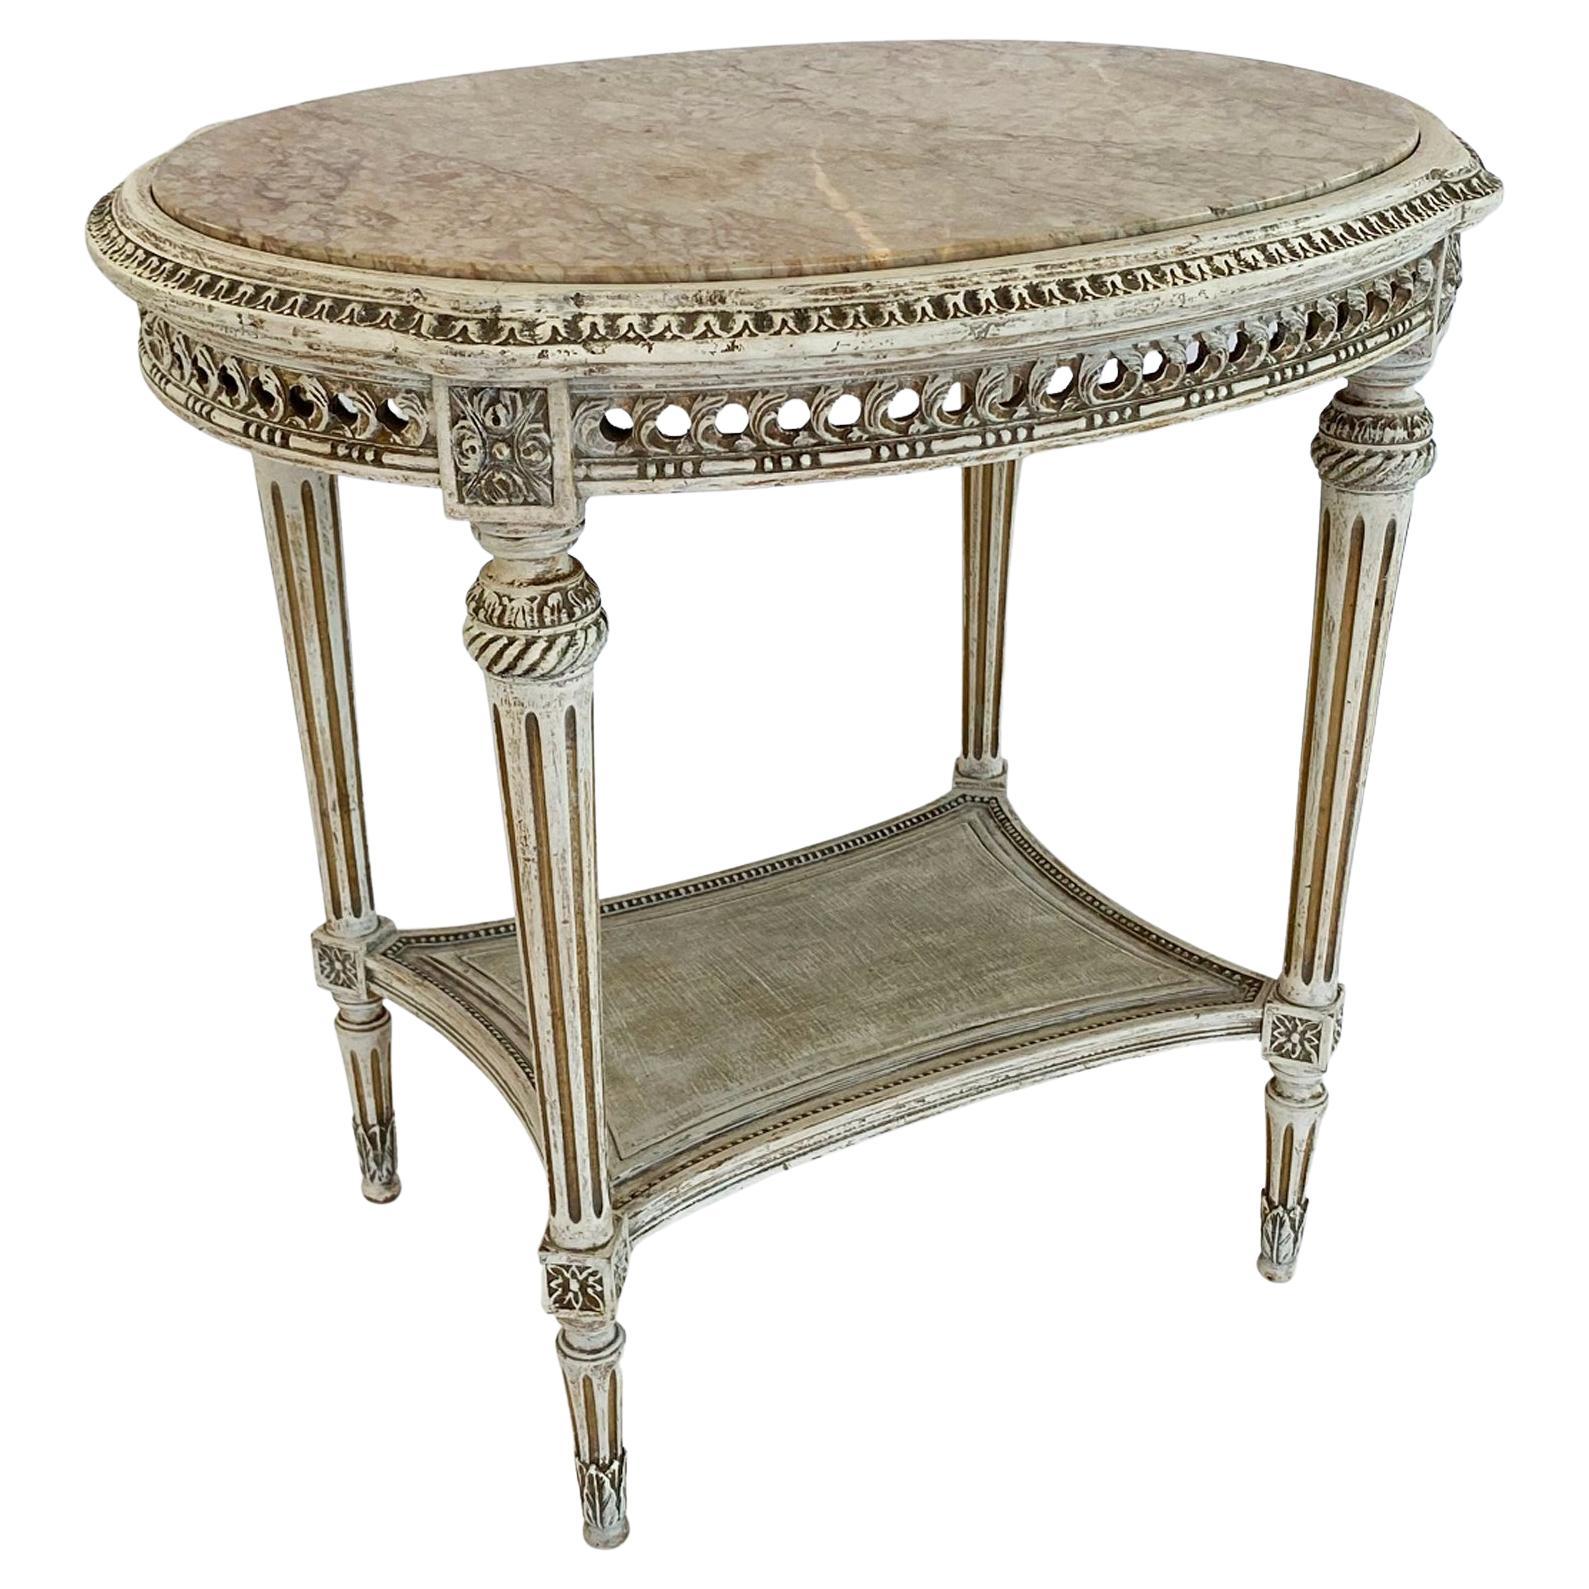 Oval Louis XVI Style Occasional Table with Marble Top